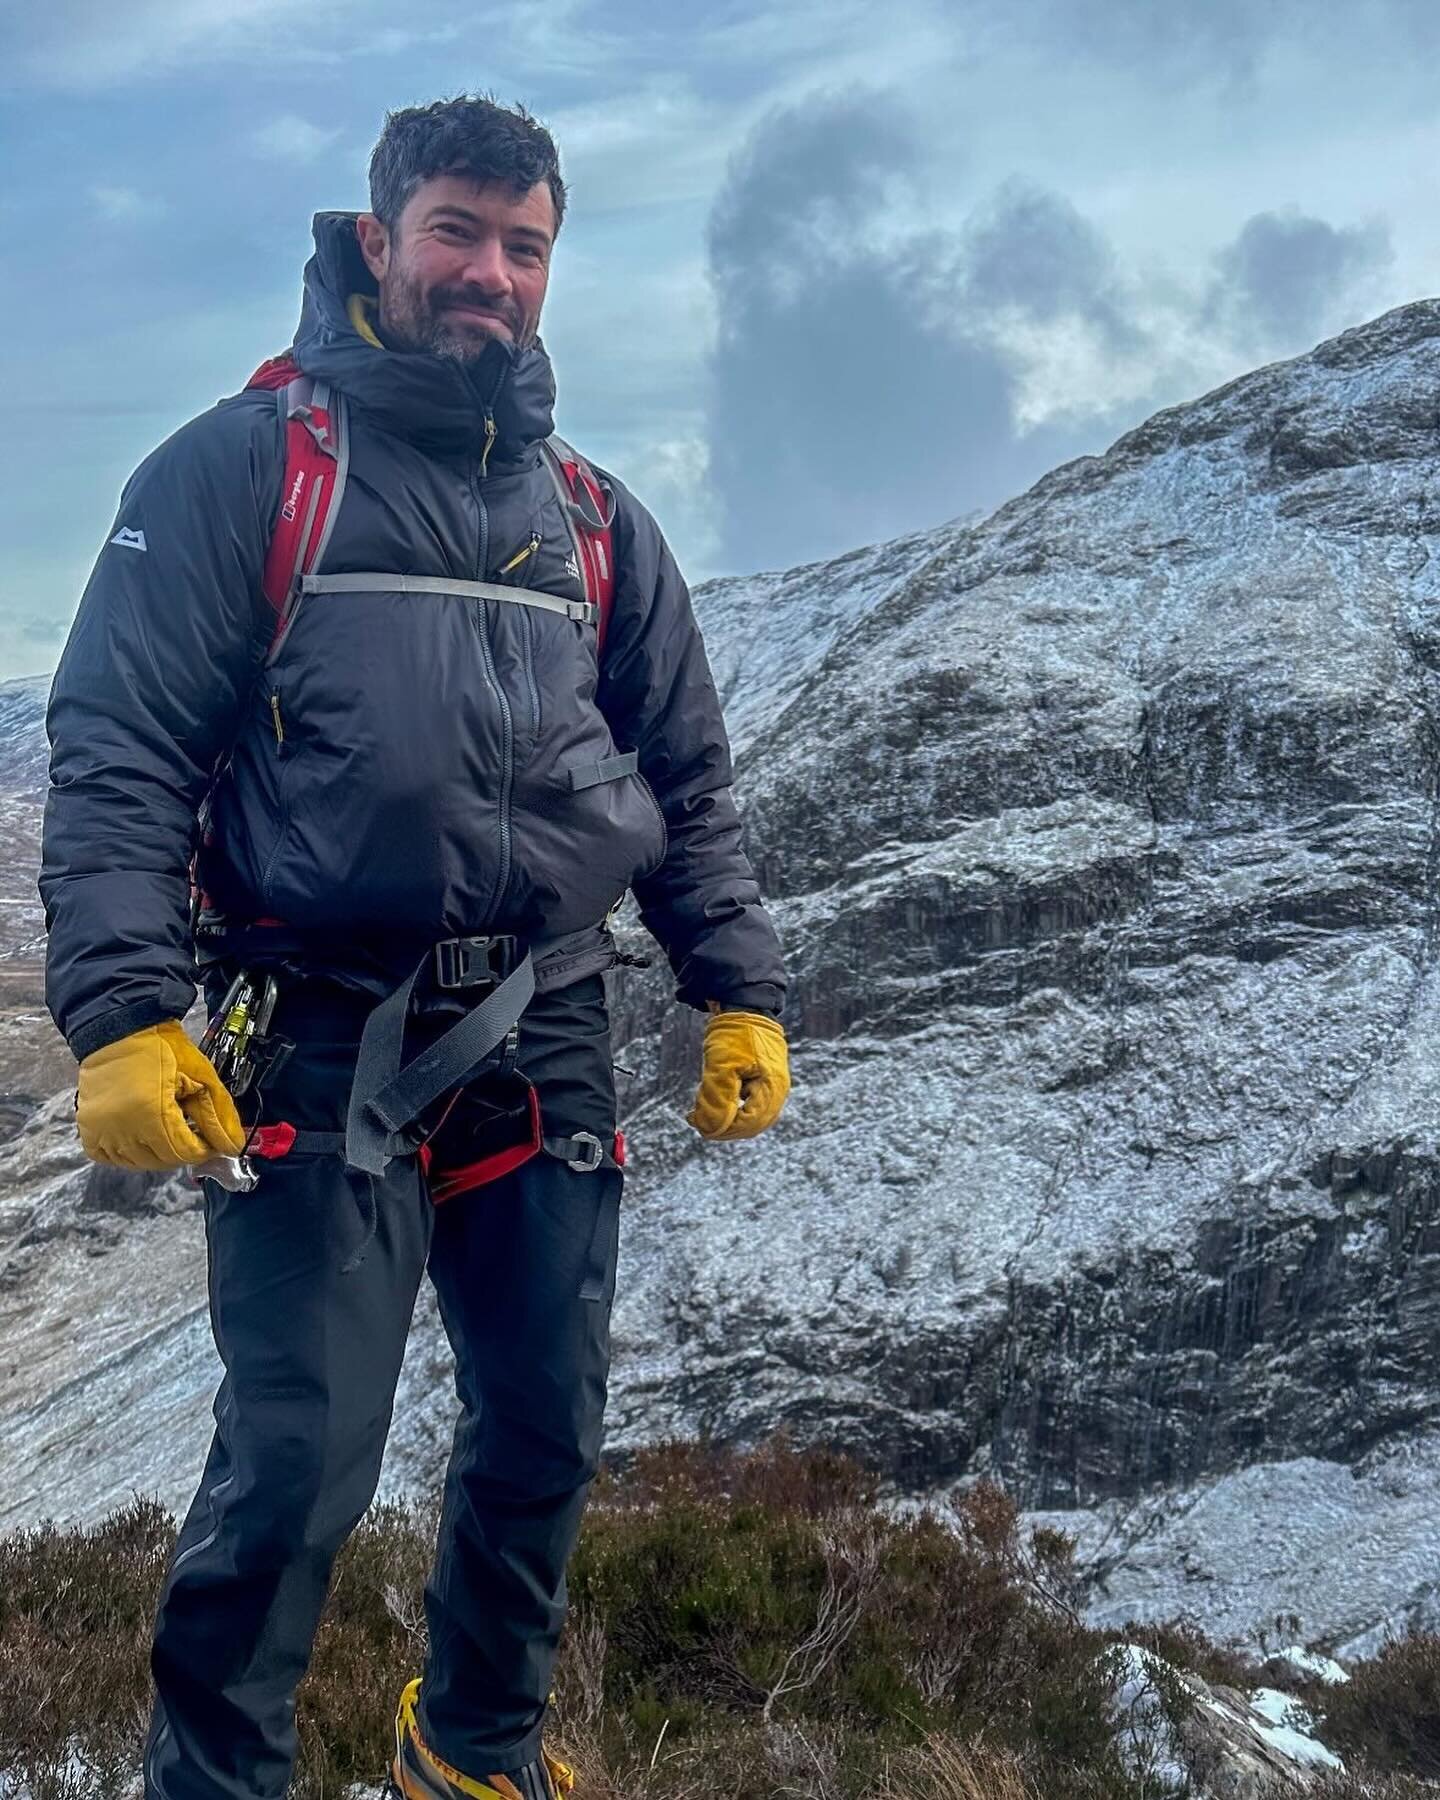 3 lessons learned from winter climbing in Scotland to take into everyday life&hellip;

1. Be prepared: Winter climbing in Scotland demands meticulous preparation. From checking weather forecasts to assessing avalanche risks and ensuring proper gear, 